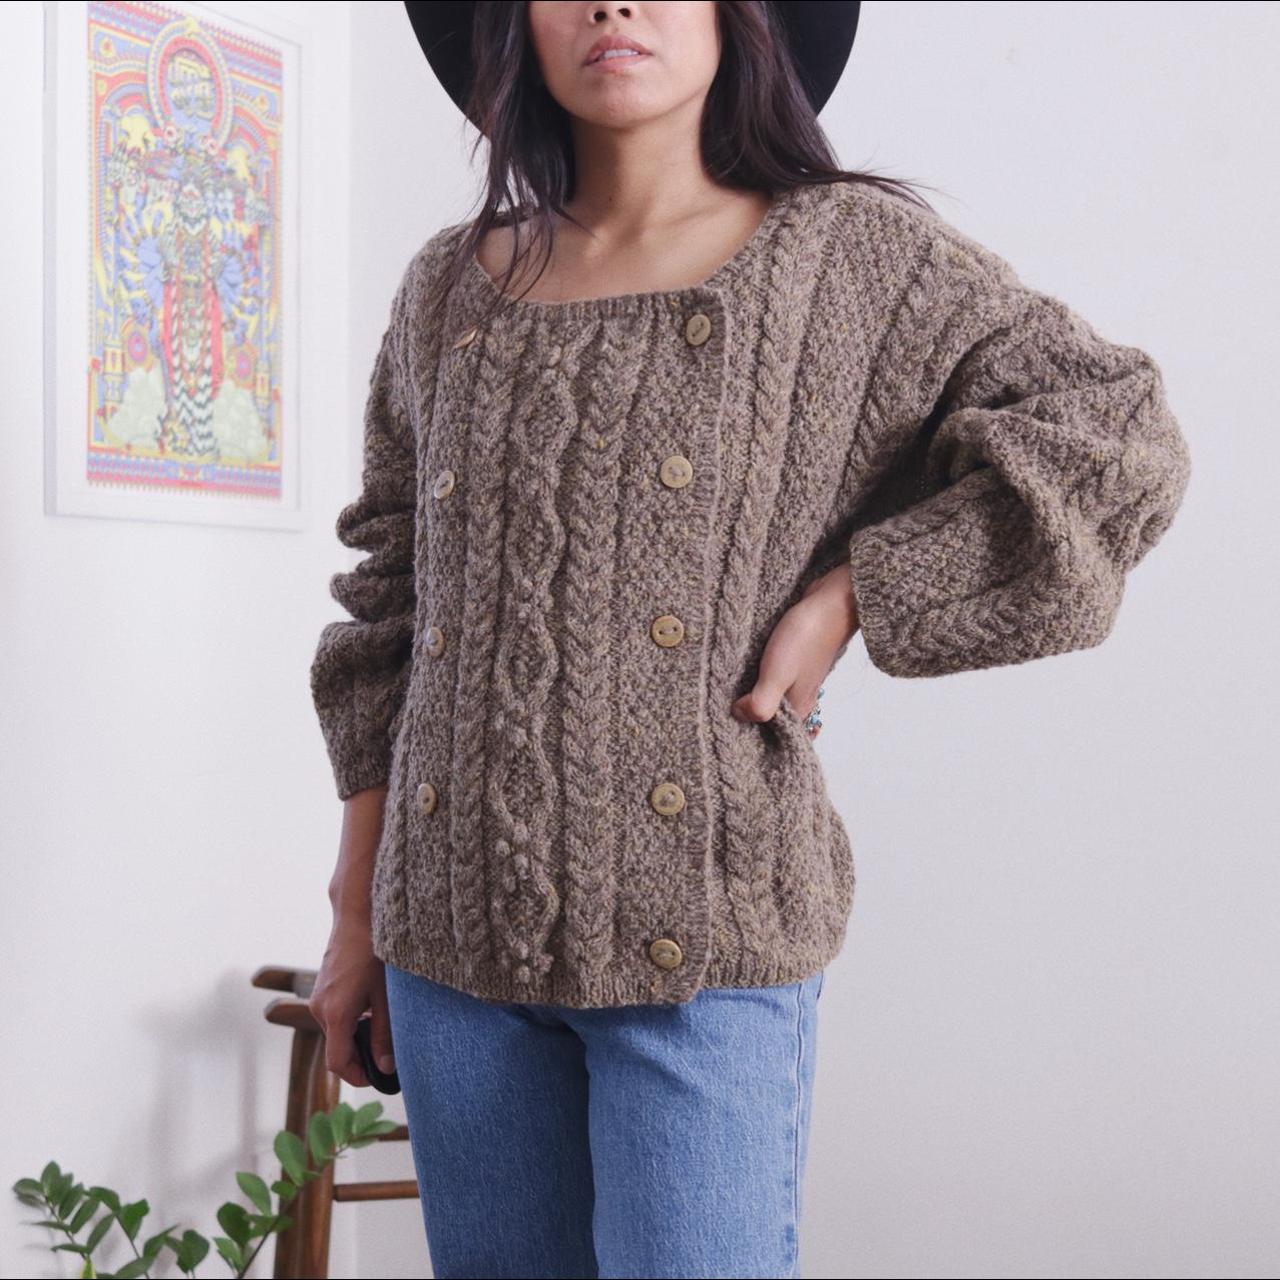 Product Image 2 - vintage 70s knit sweater

DESCRIPTION
mid to